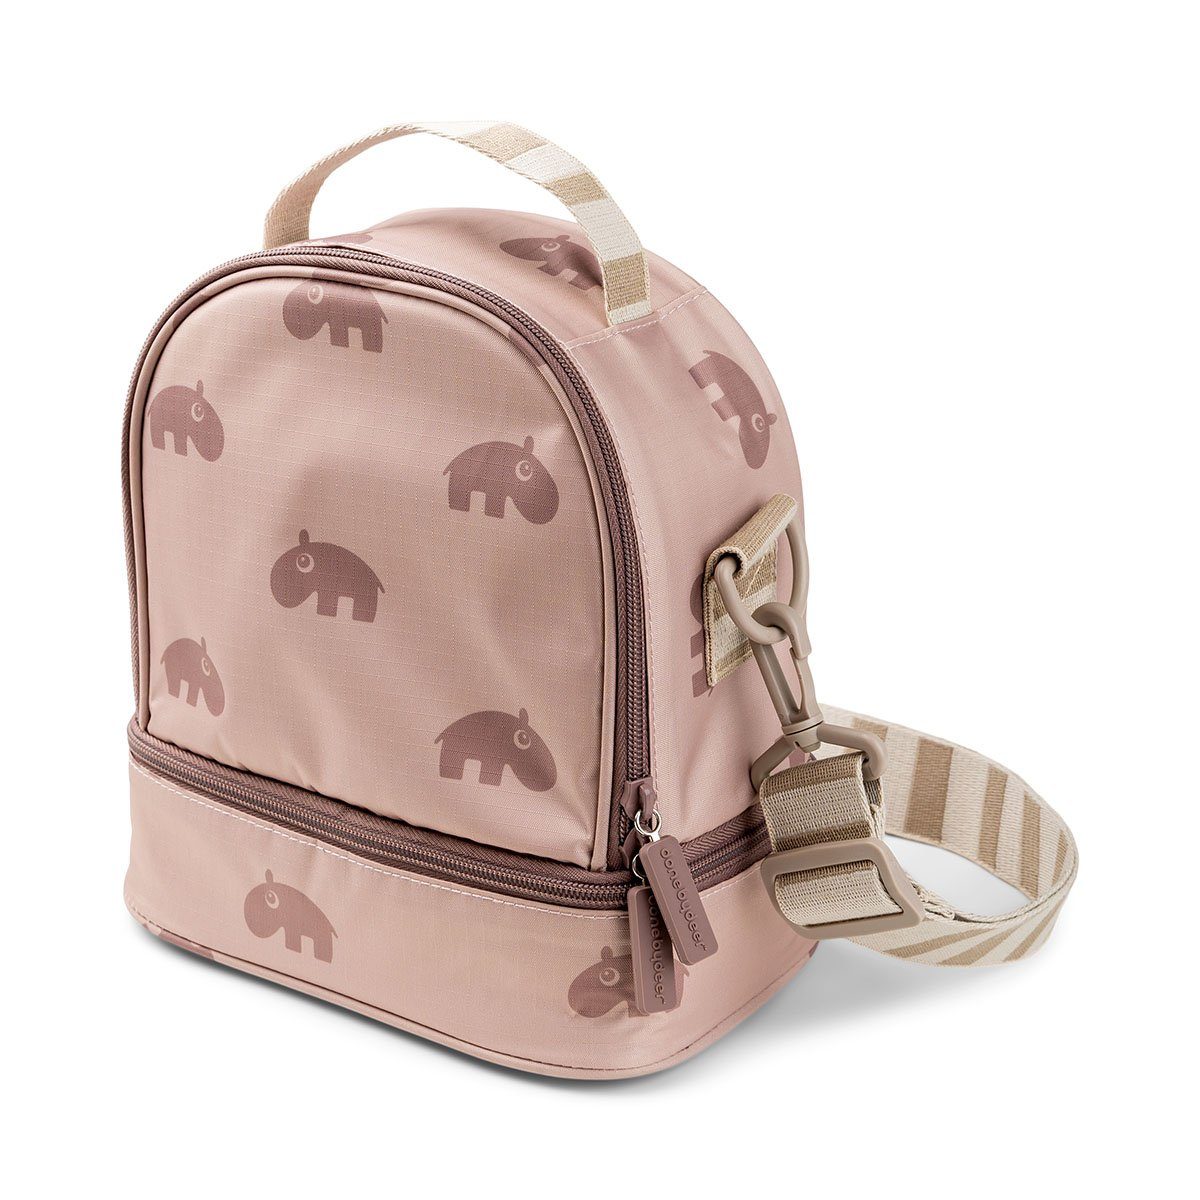 Done by Deer Lunchbox Isolierte Kinder-Lunchtasche Ozzo Rosa 22 x 14,5 x H24 cm